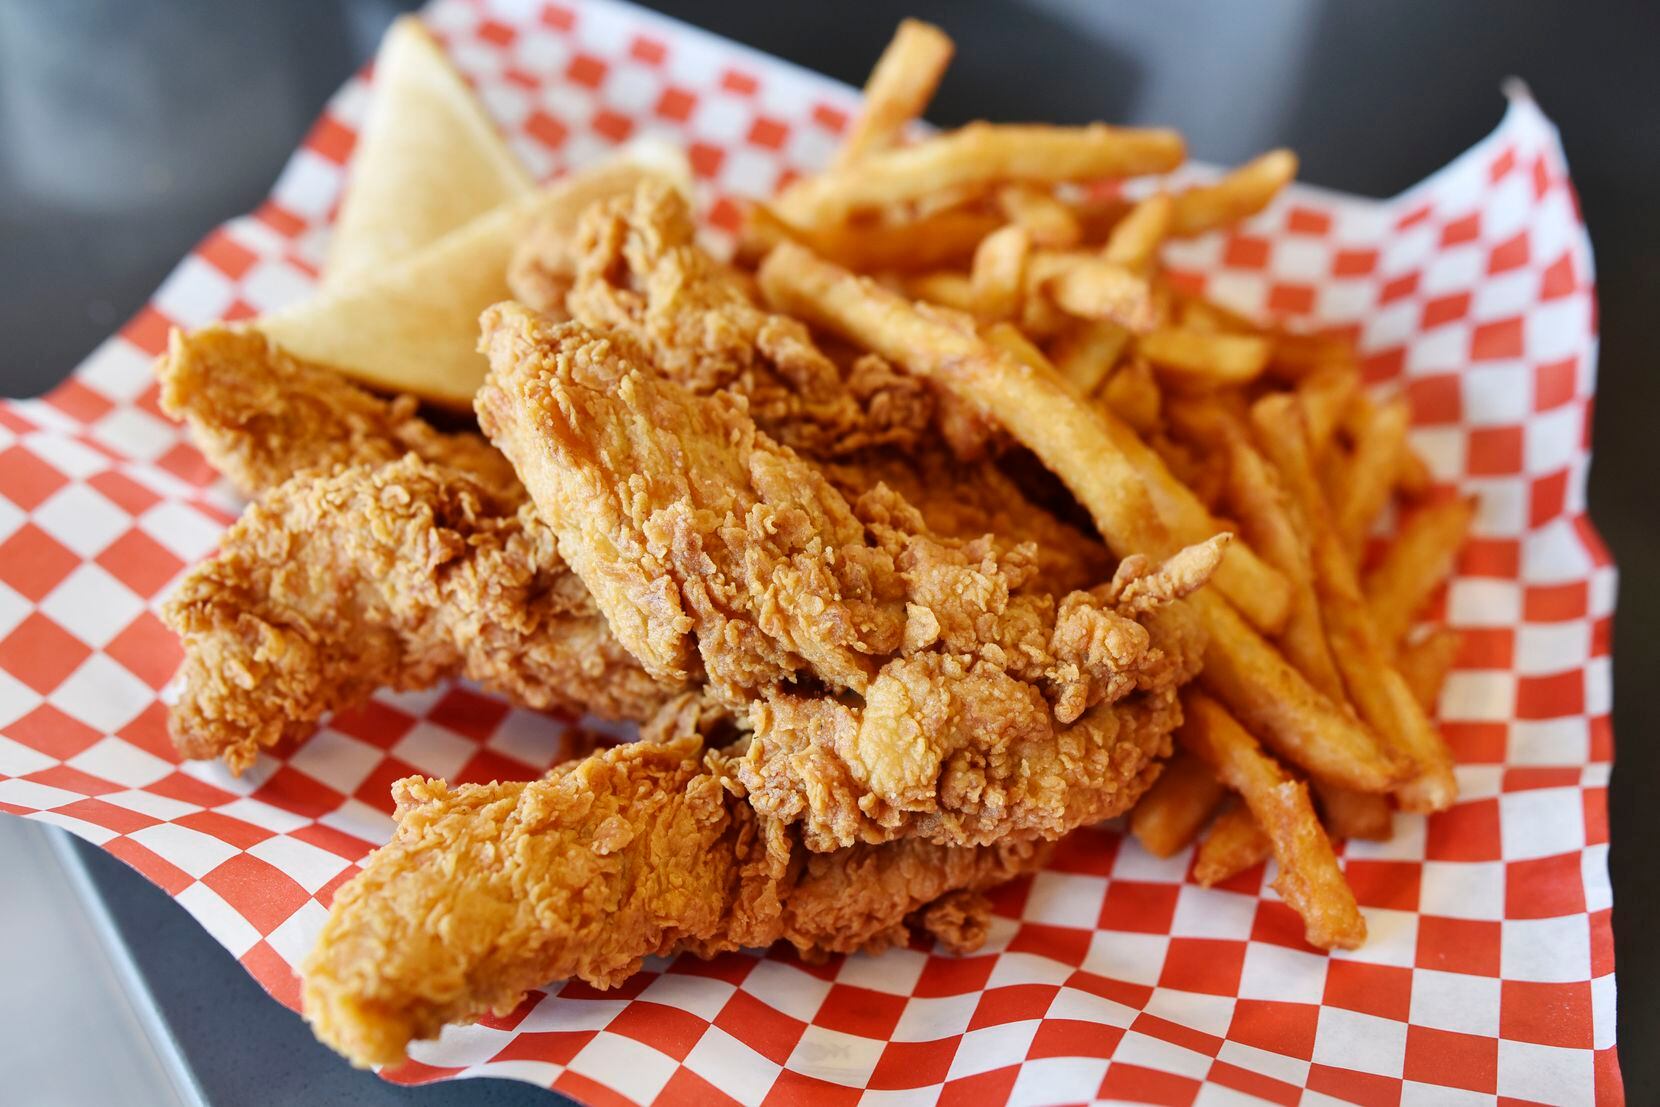 Chicken tenders, fries and toast are a popular order at Mike's Chicken in Dallas. If you're...